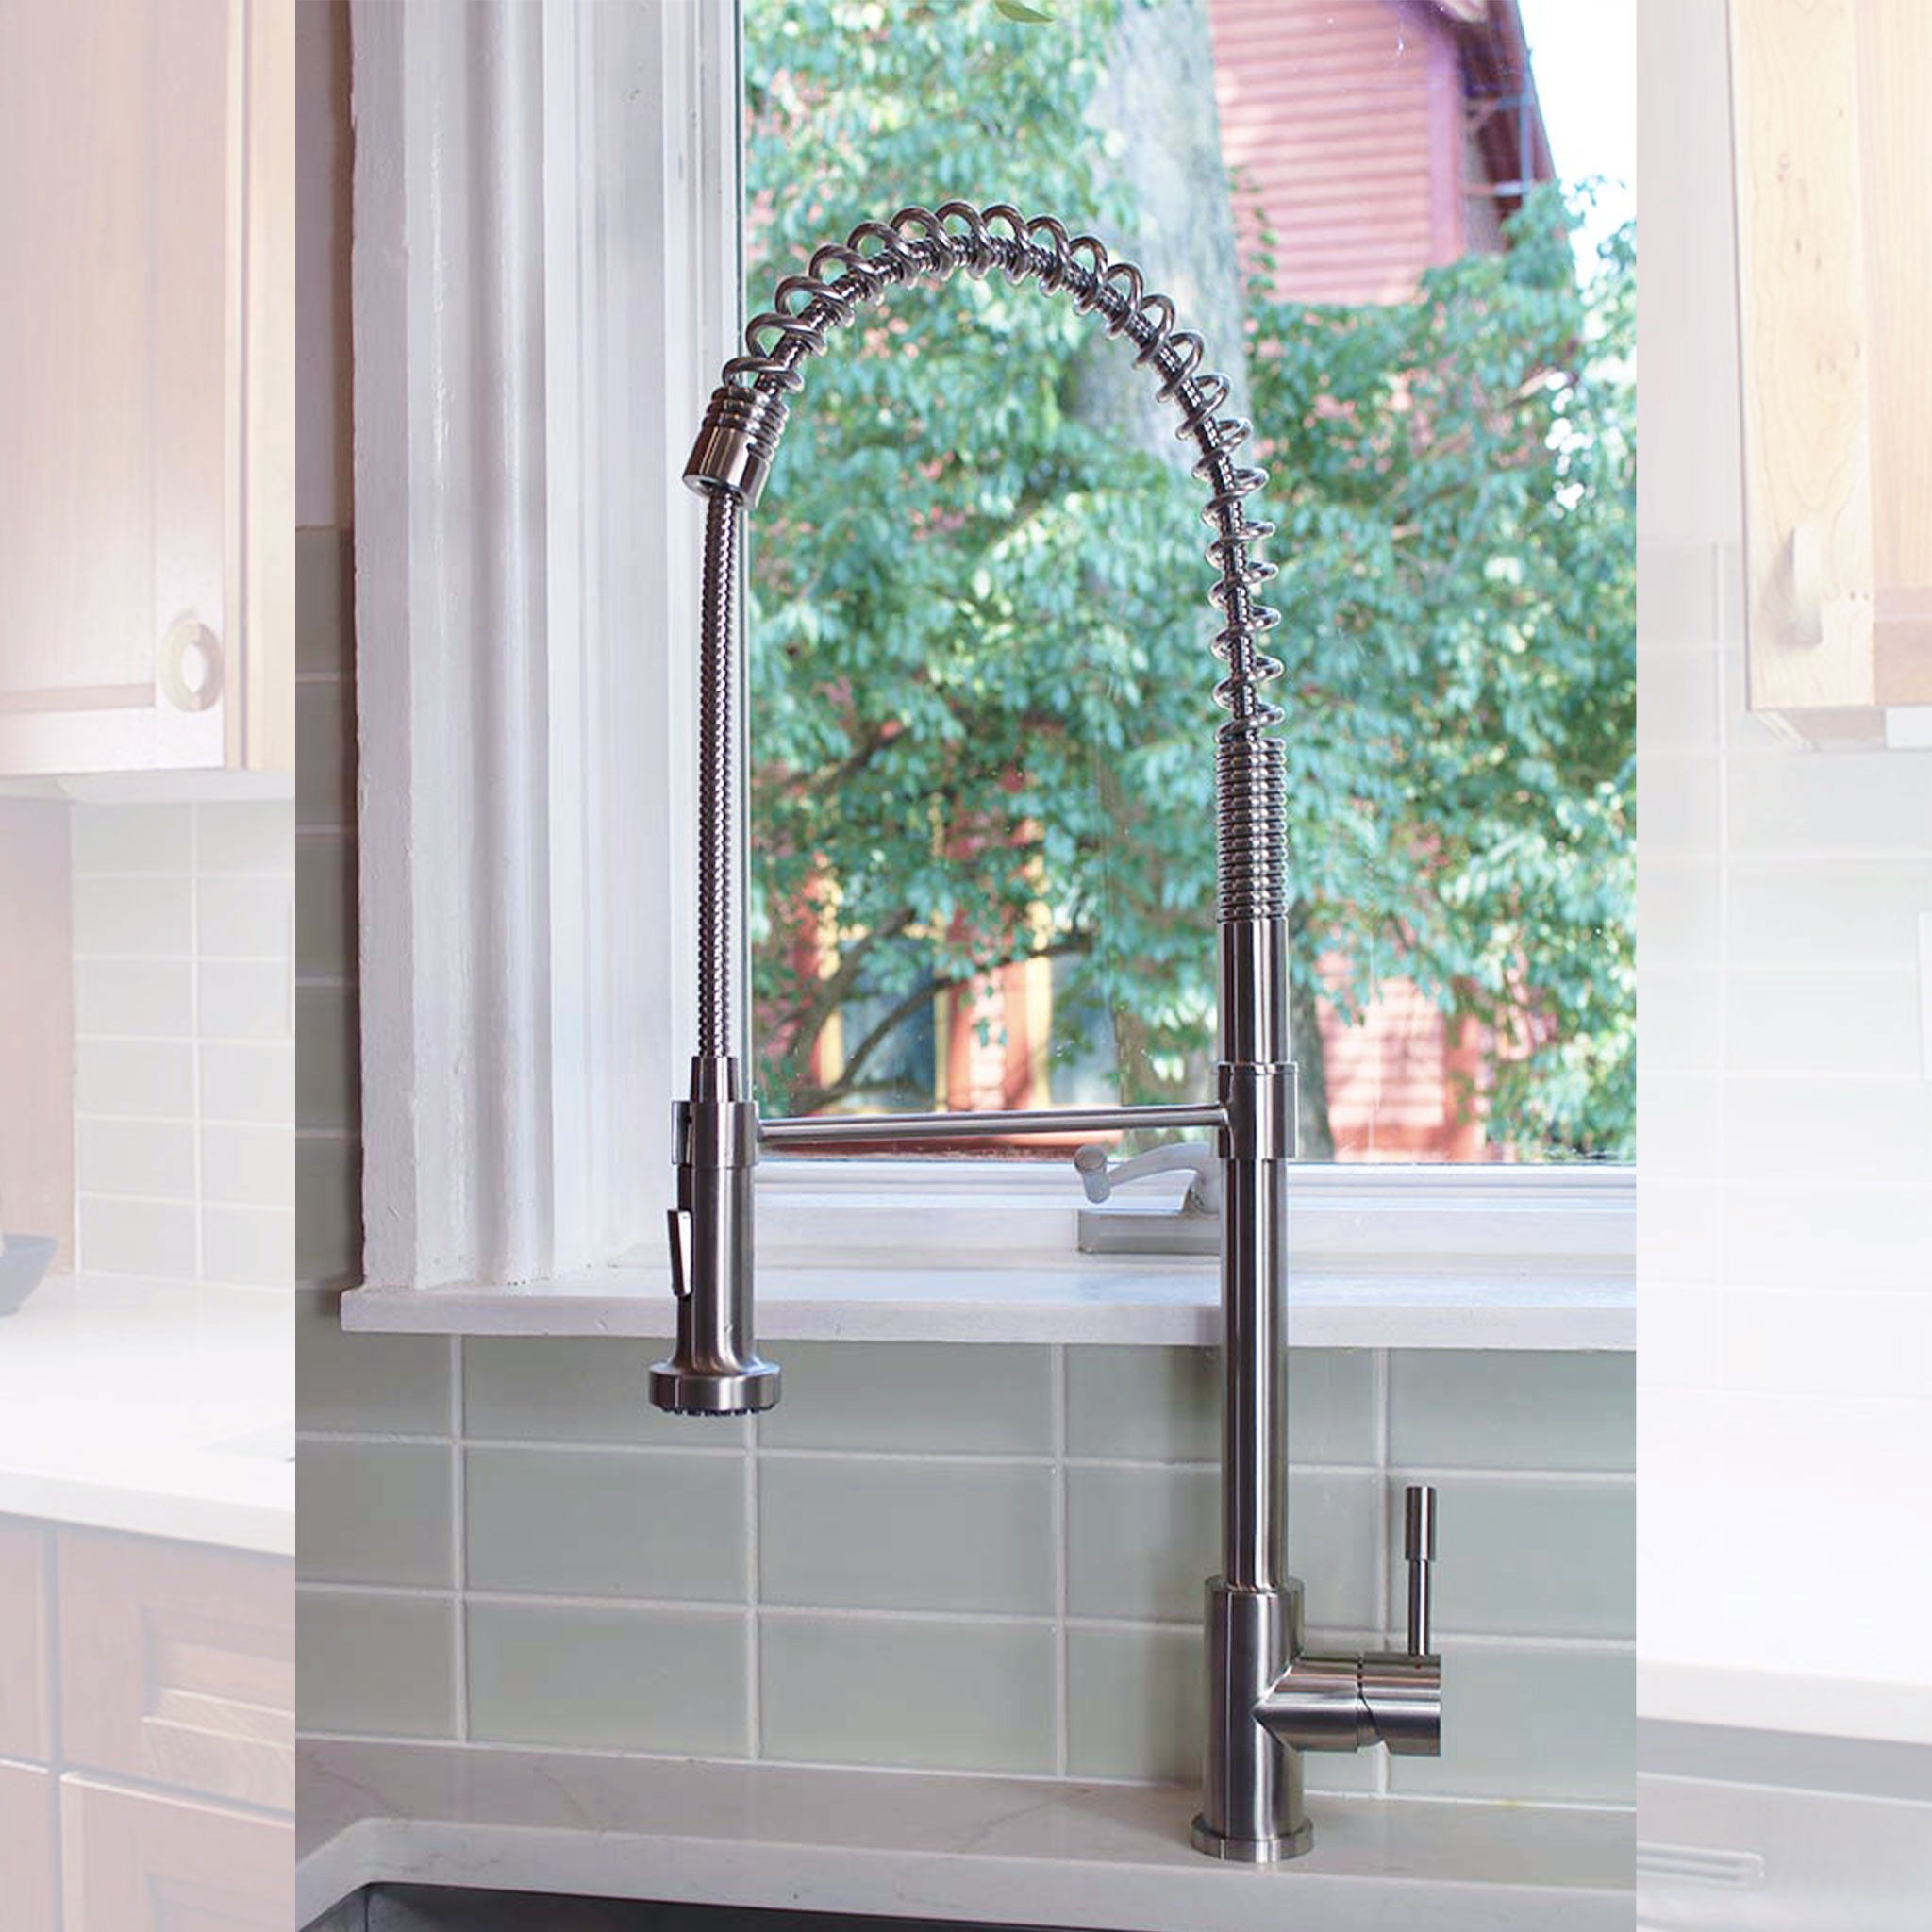 The Jerry Stainless Steel Kitchen Faucet from Create Good Sinks